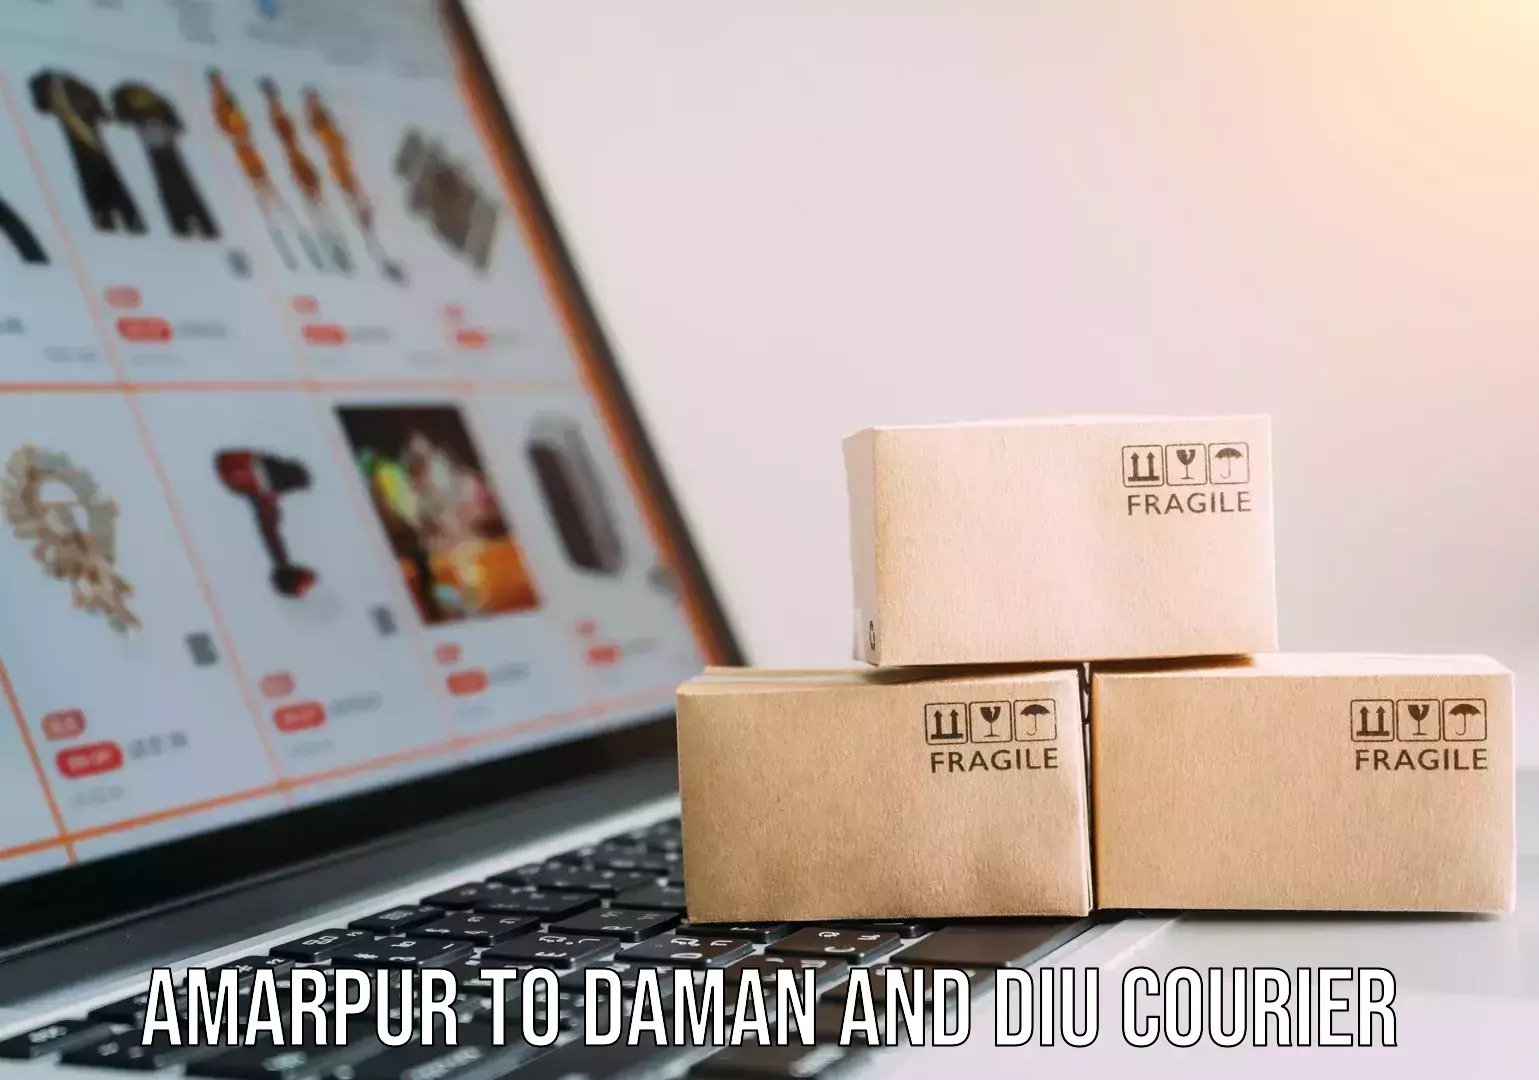 Comprehensive shipping network Amarpur to Daman and Diu